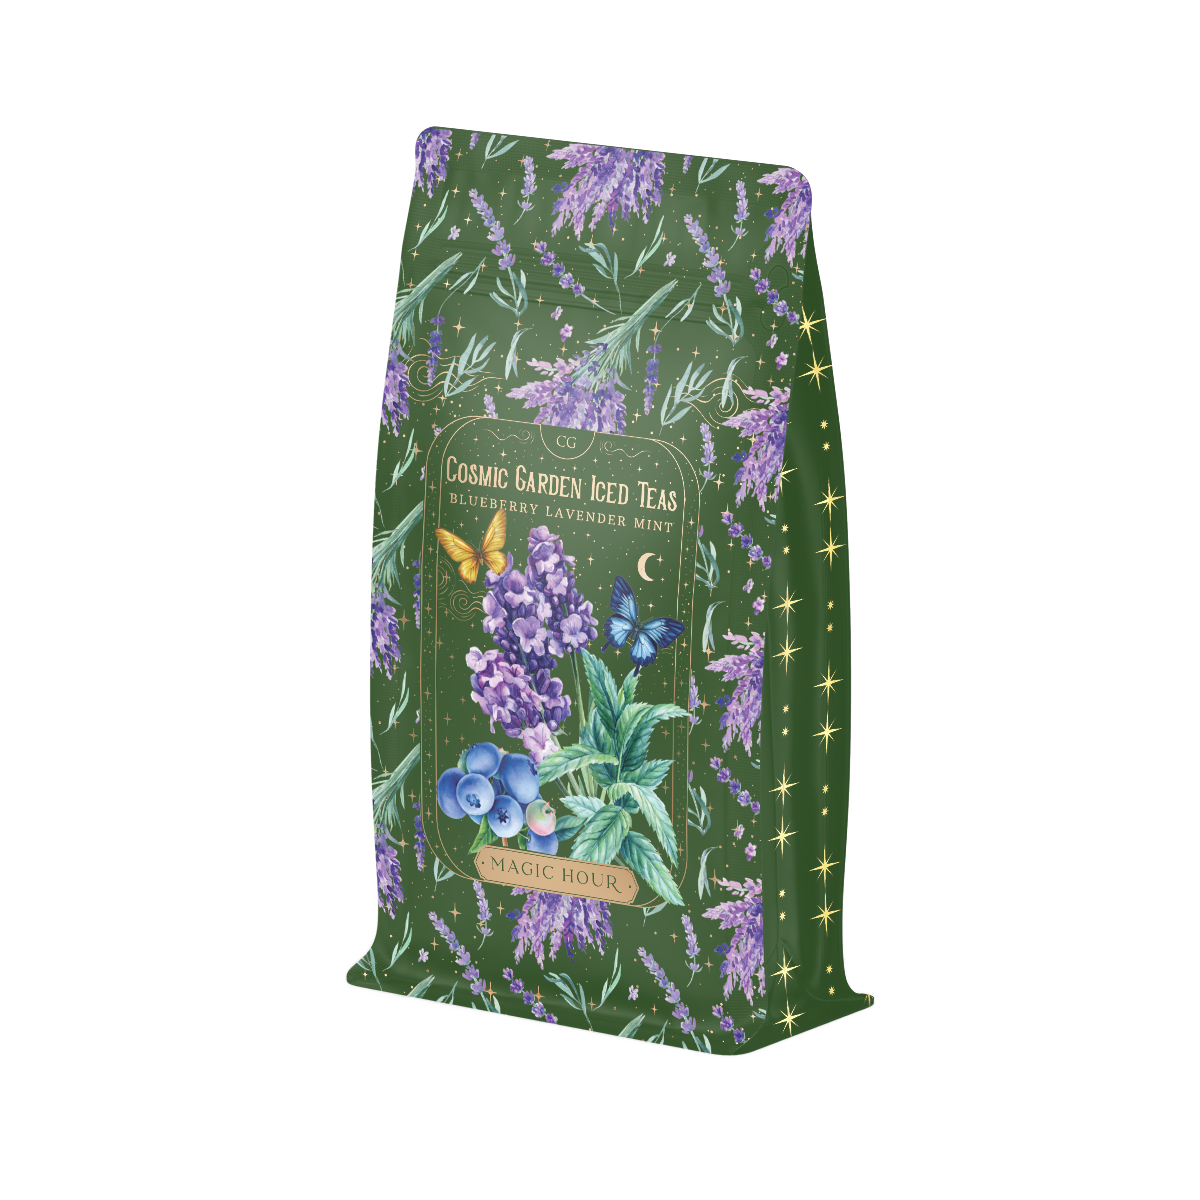 A green, floral-themed bag of Blueberry Lavender Mint: Cosmic Garden Iced Tea by Magic Hour. The packaging features illustrations of blueberries, lavender, butterflies, and stars, with the flavors listed as blackberry, lavender, and mint. Enjoy this delightful loose leaf tea blend for an organic tea experience.